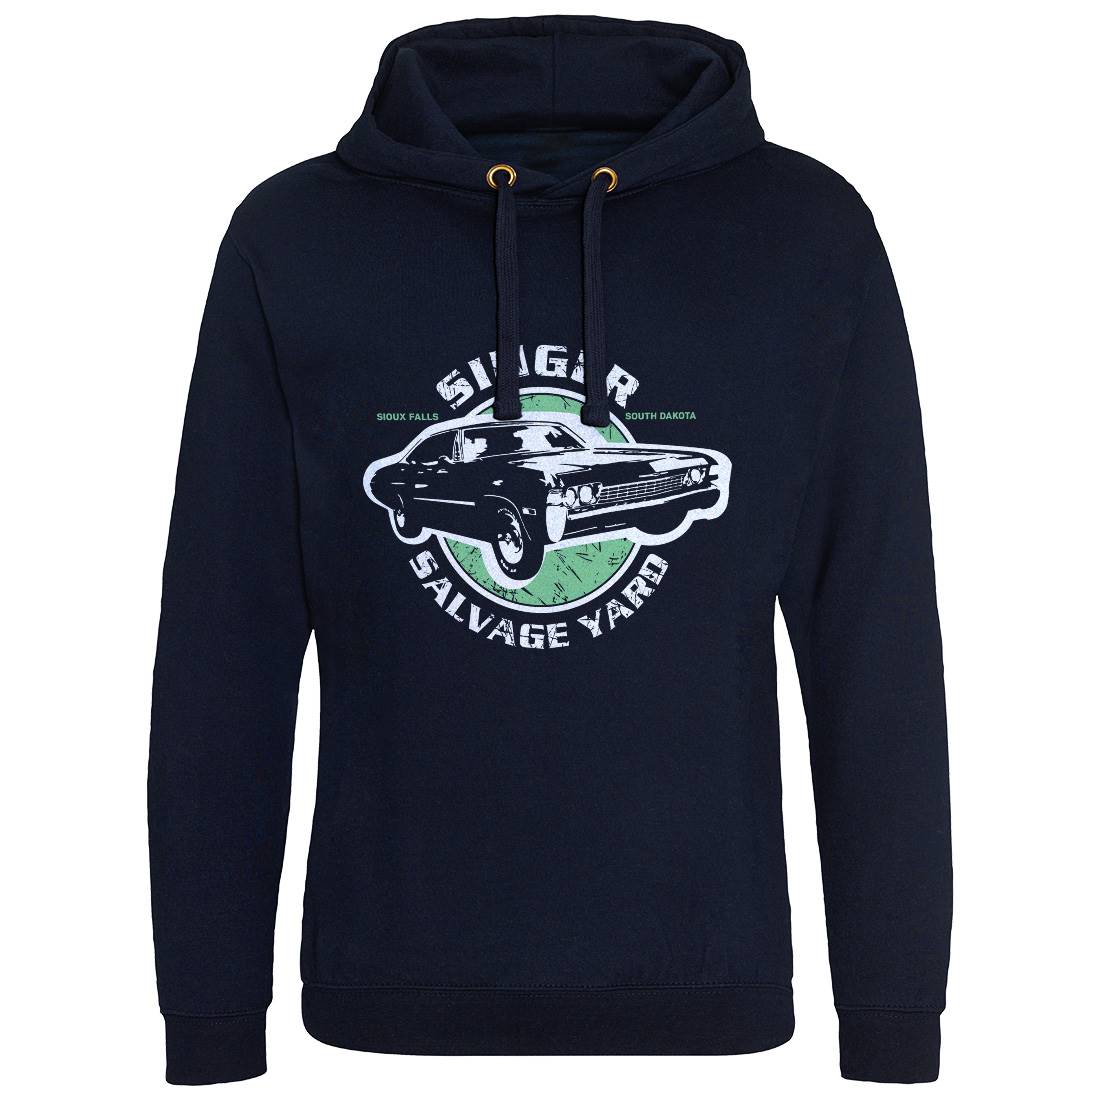 Singer Salvage Yard Mens Hoodie Without Pocket Cars D377